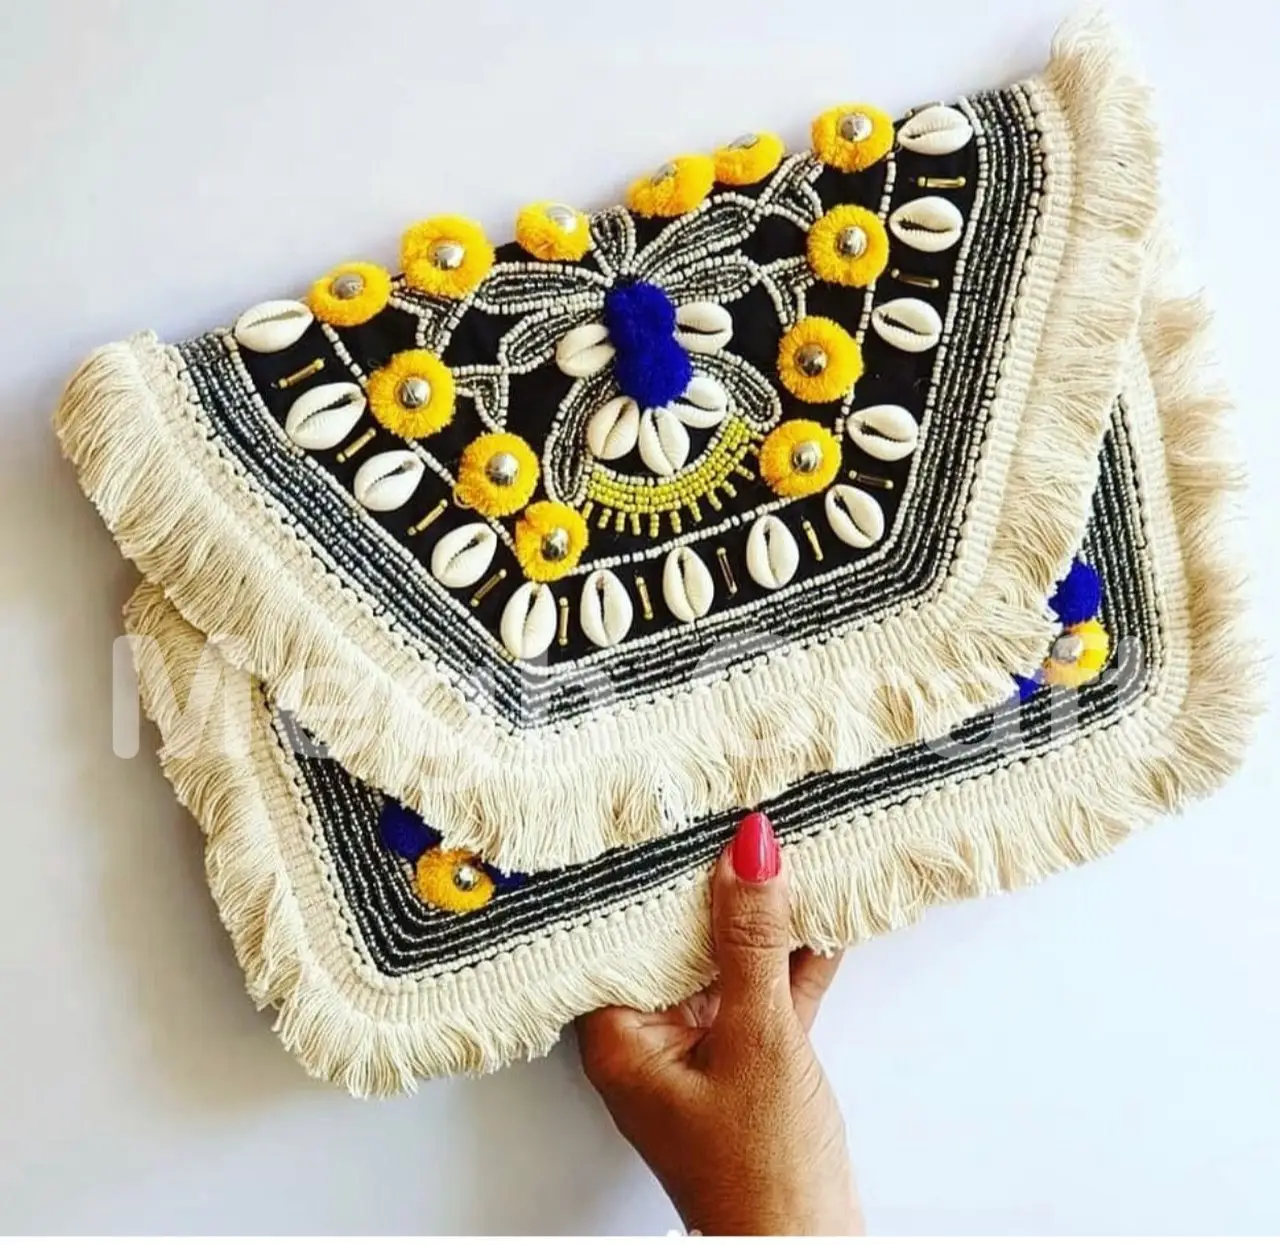 Best Women's Bags Handmade Embroidery Party Accessories Handbags Embroidery Bags